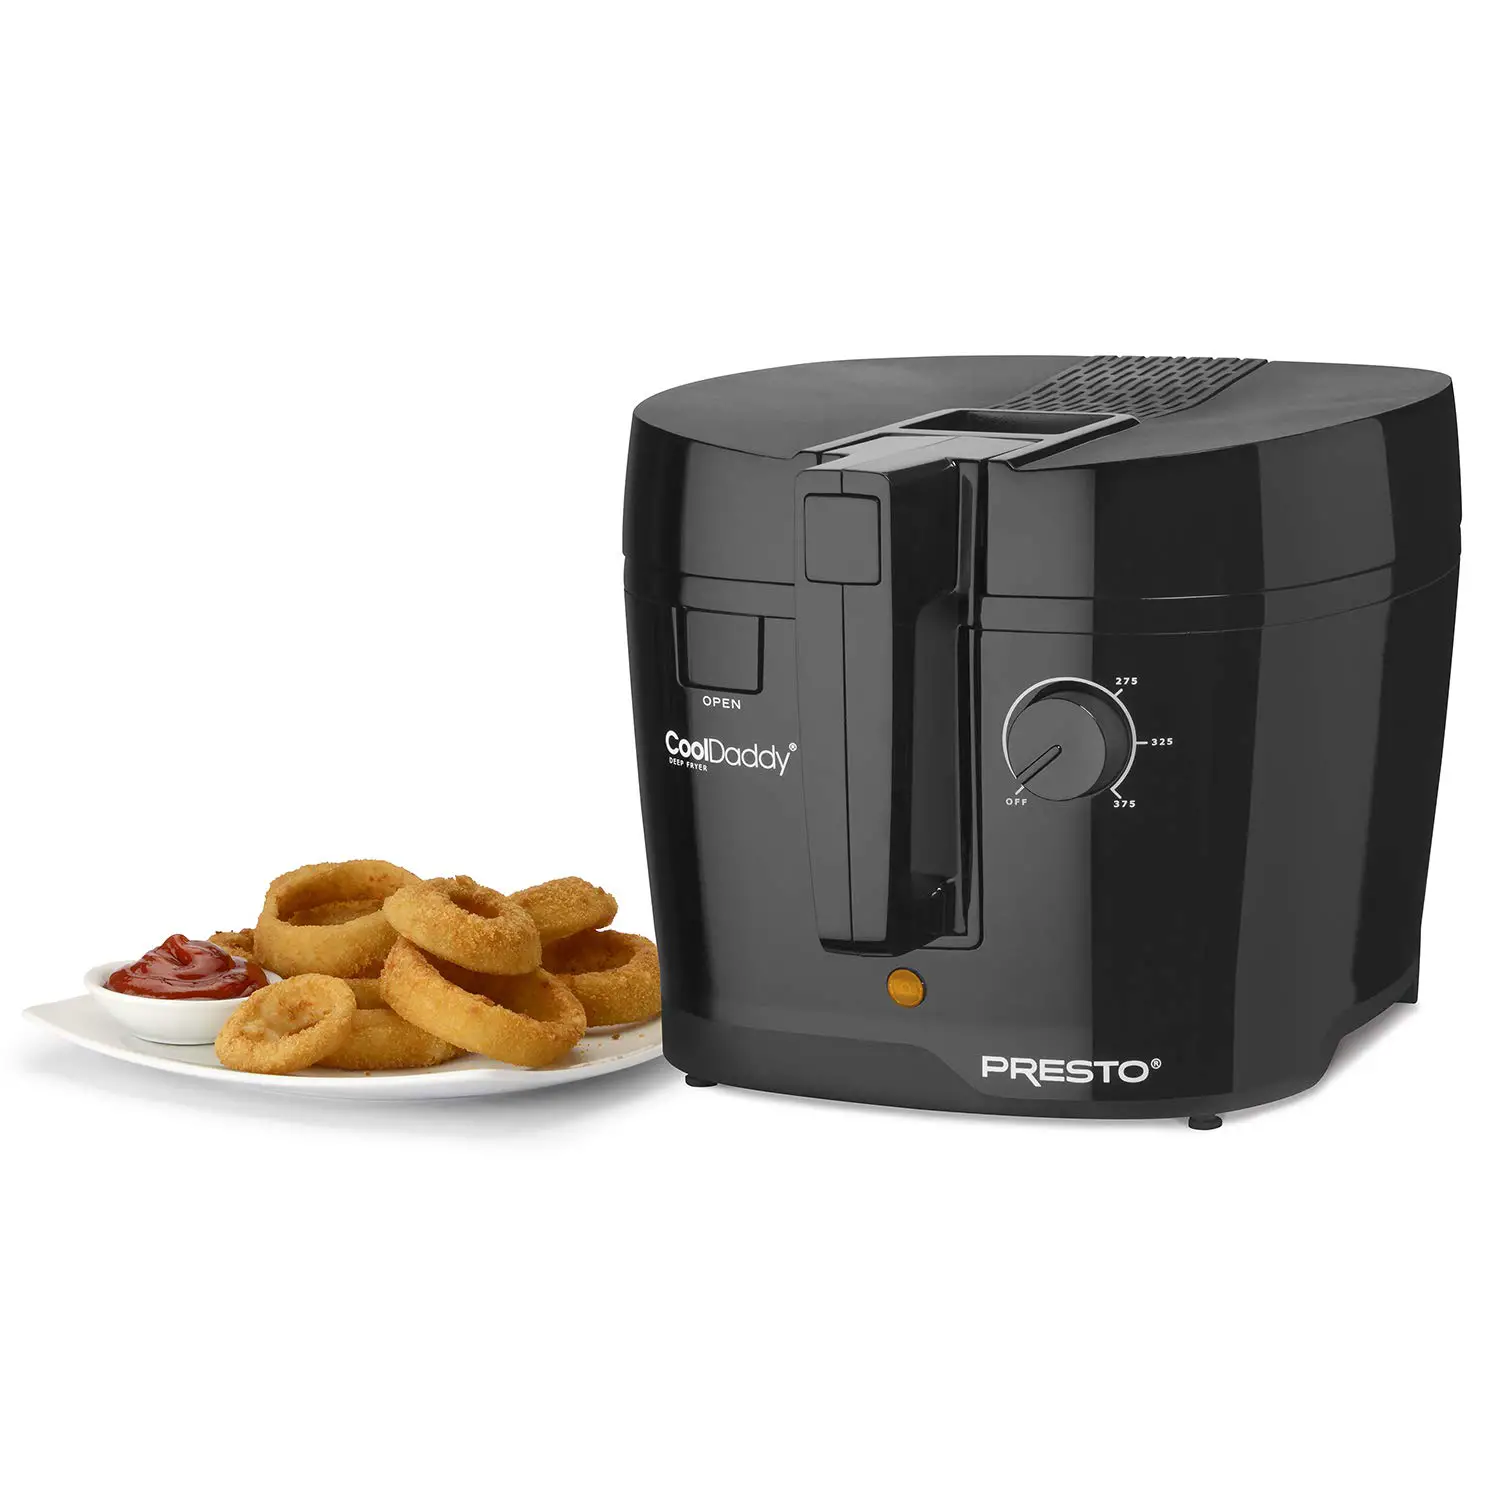 In Presto Deep Fryer Reviews, Presto 05442 CoolDaddy is the top rated deep fryer with a basket with foldable handle and a lid with odor filter.